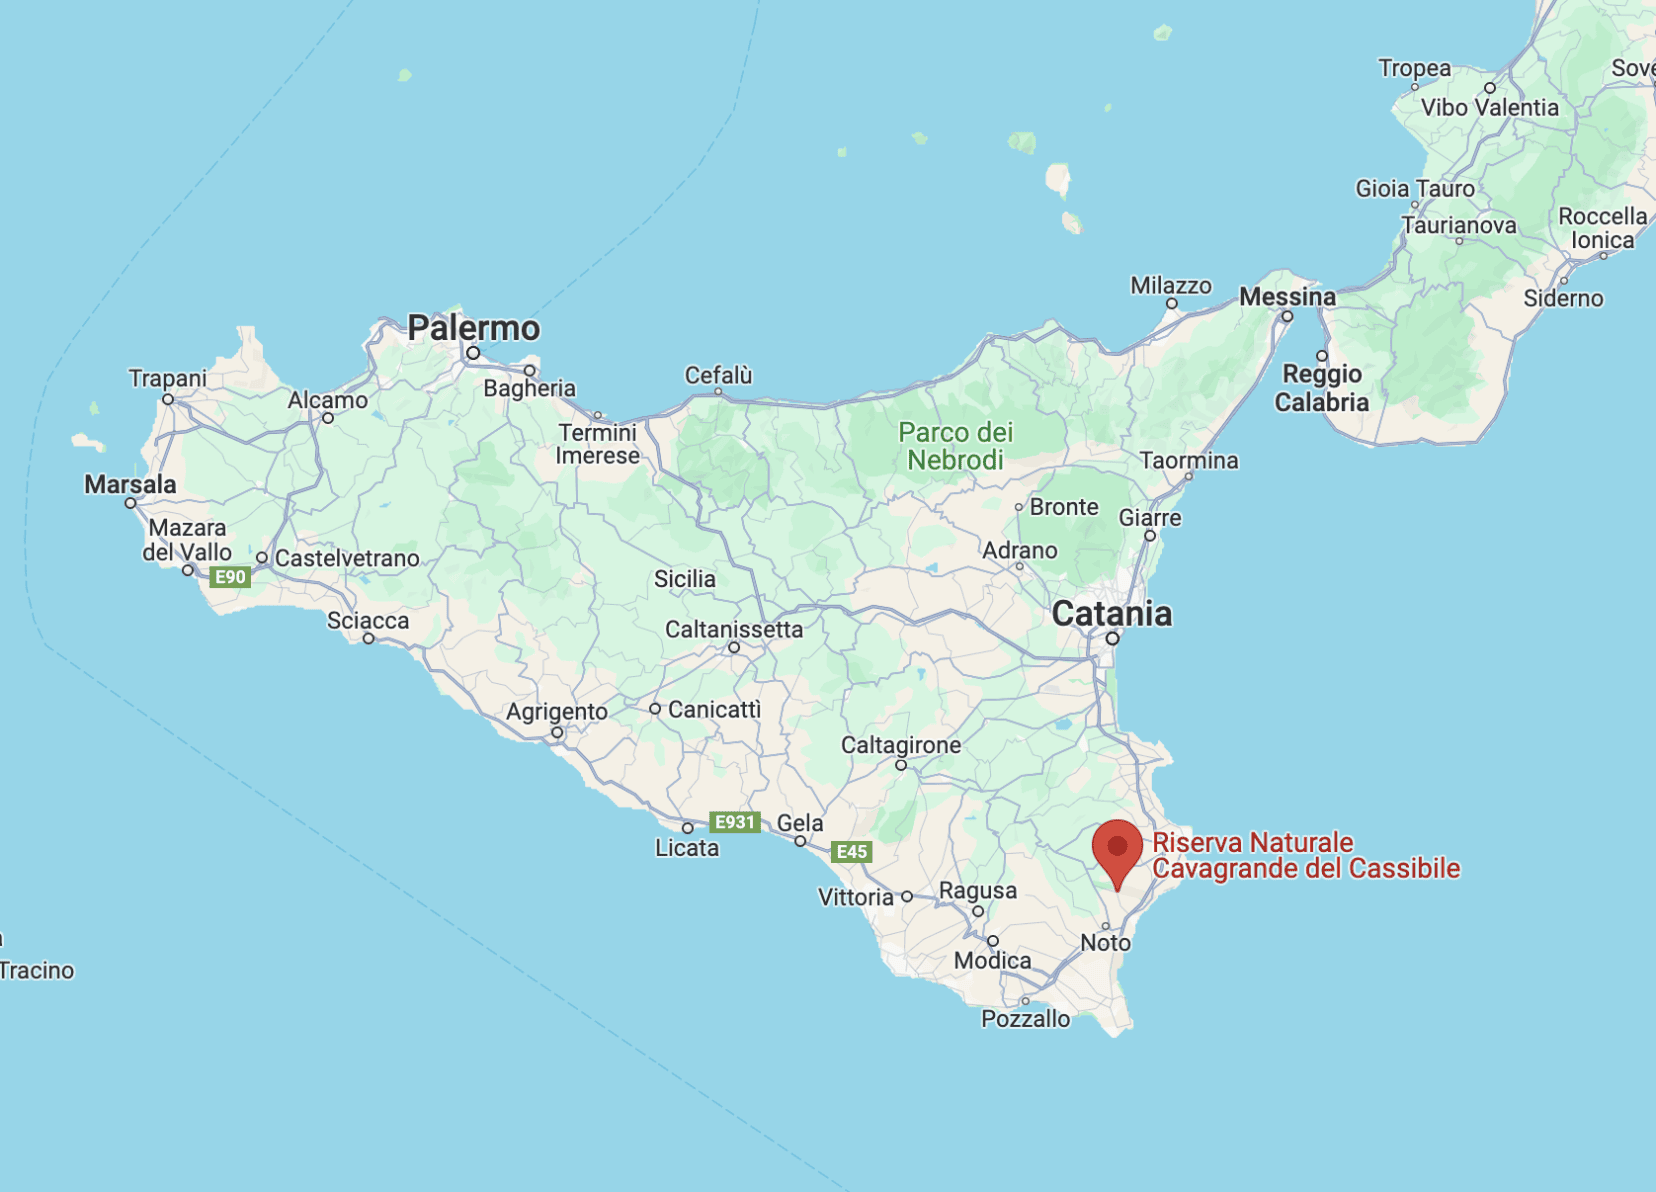 Cavagrande on the map of Sicily